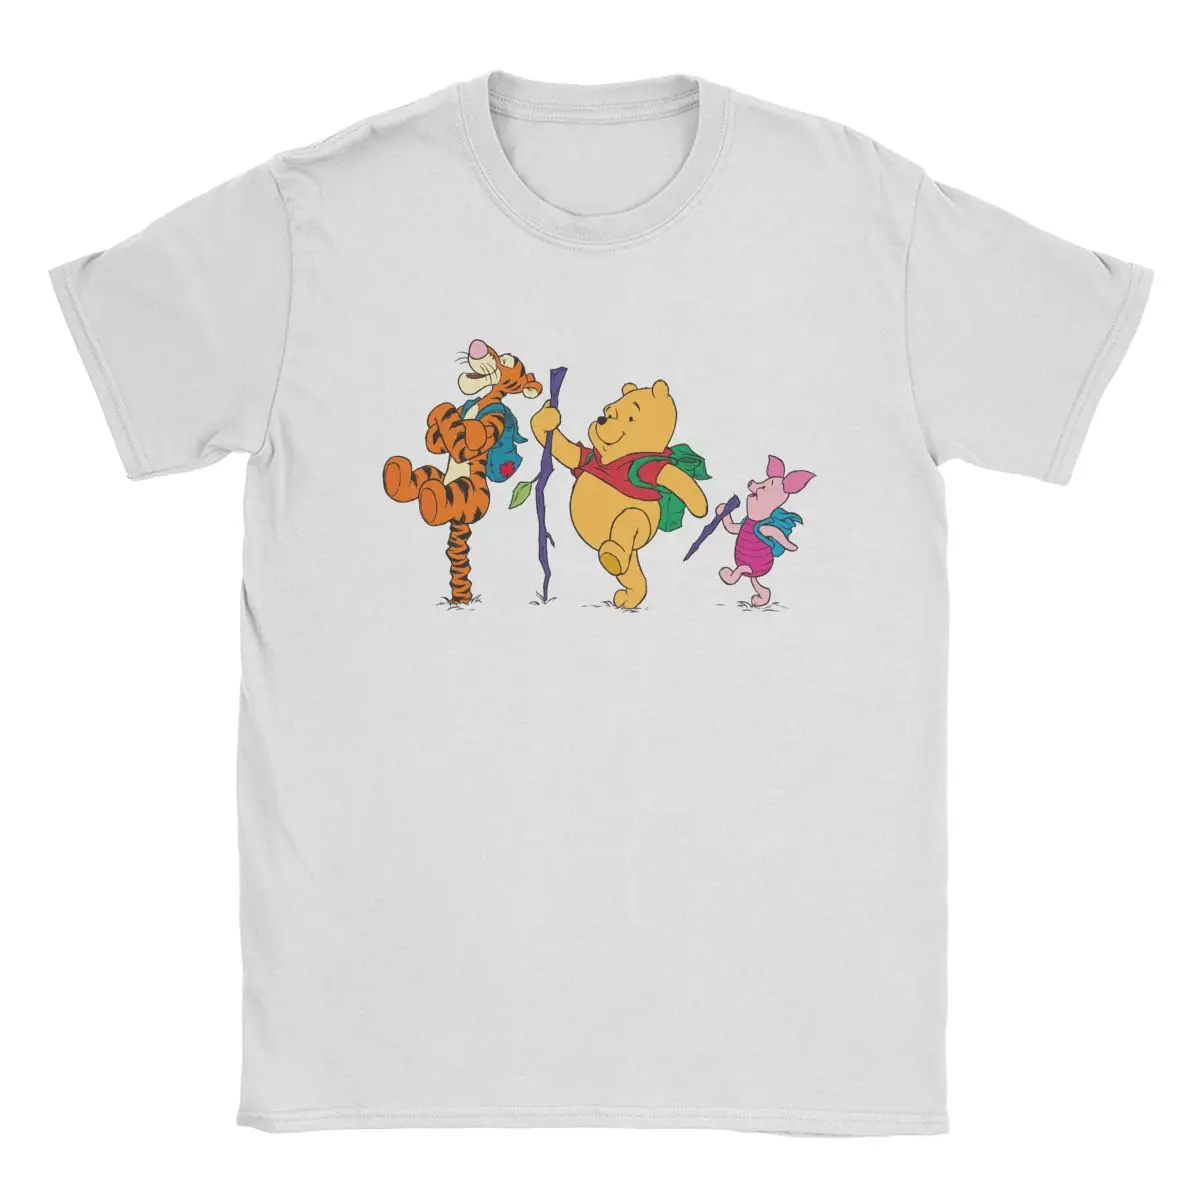 Disney Piglet Tigger And Winnie The Pooh Hiking T Shirts Men's Cotton Cool T-Shirt Crew Neck Tee Shirt Short Sleeve Tops Graphic